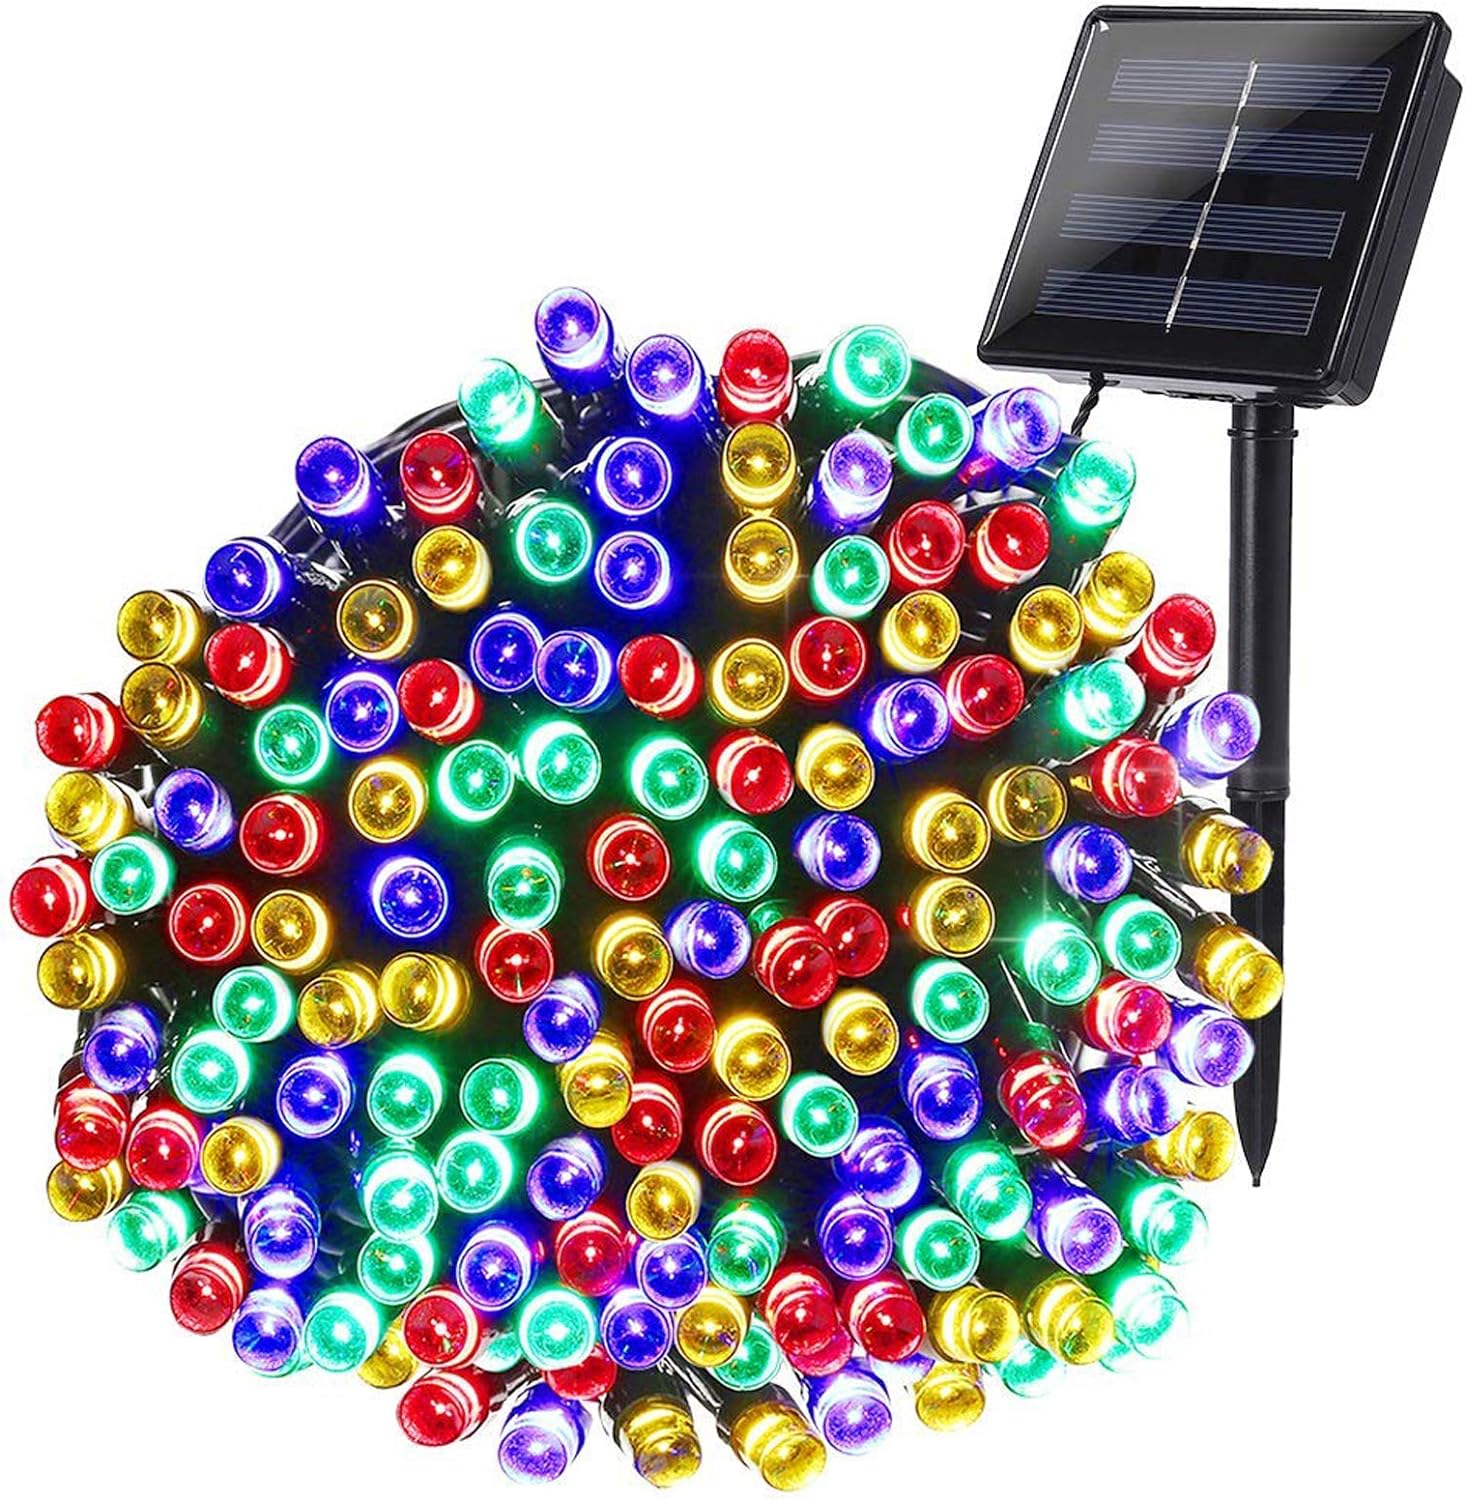 Joomer Solar Christmas Lights Review: 10 Things You Should Know